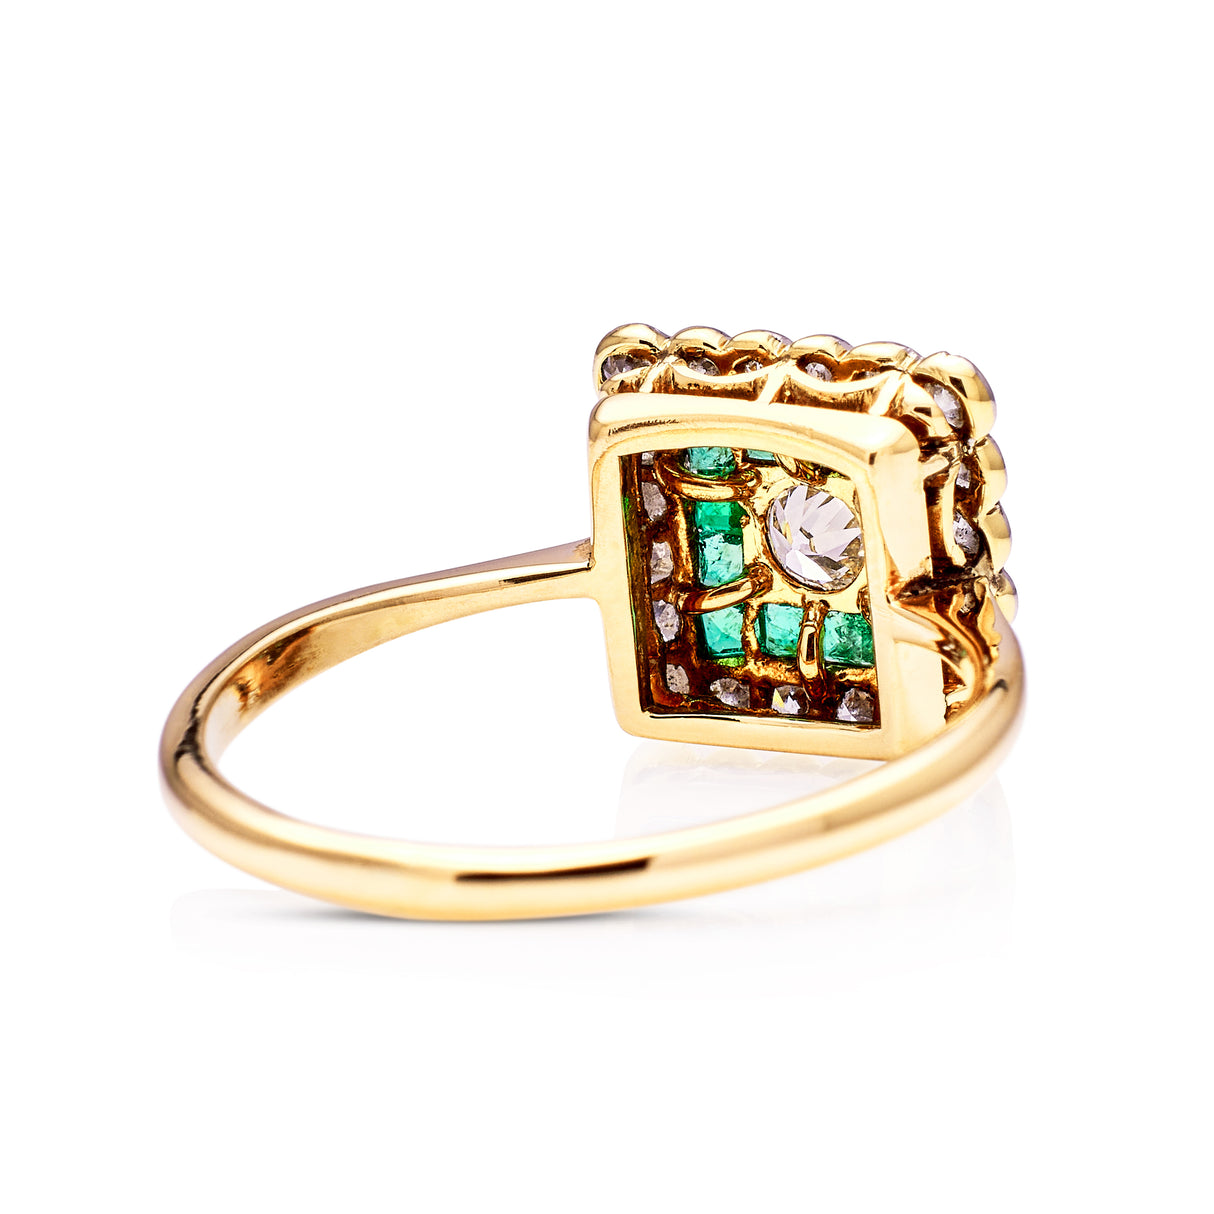 Antique, Emerald and Diamond Square Cluster Ring, 18ct Yellow Gold and Platinum rear view